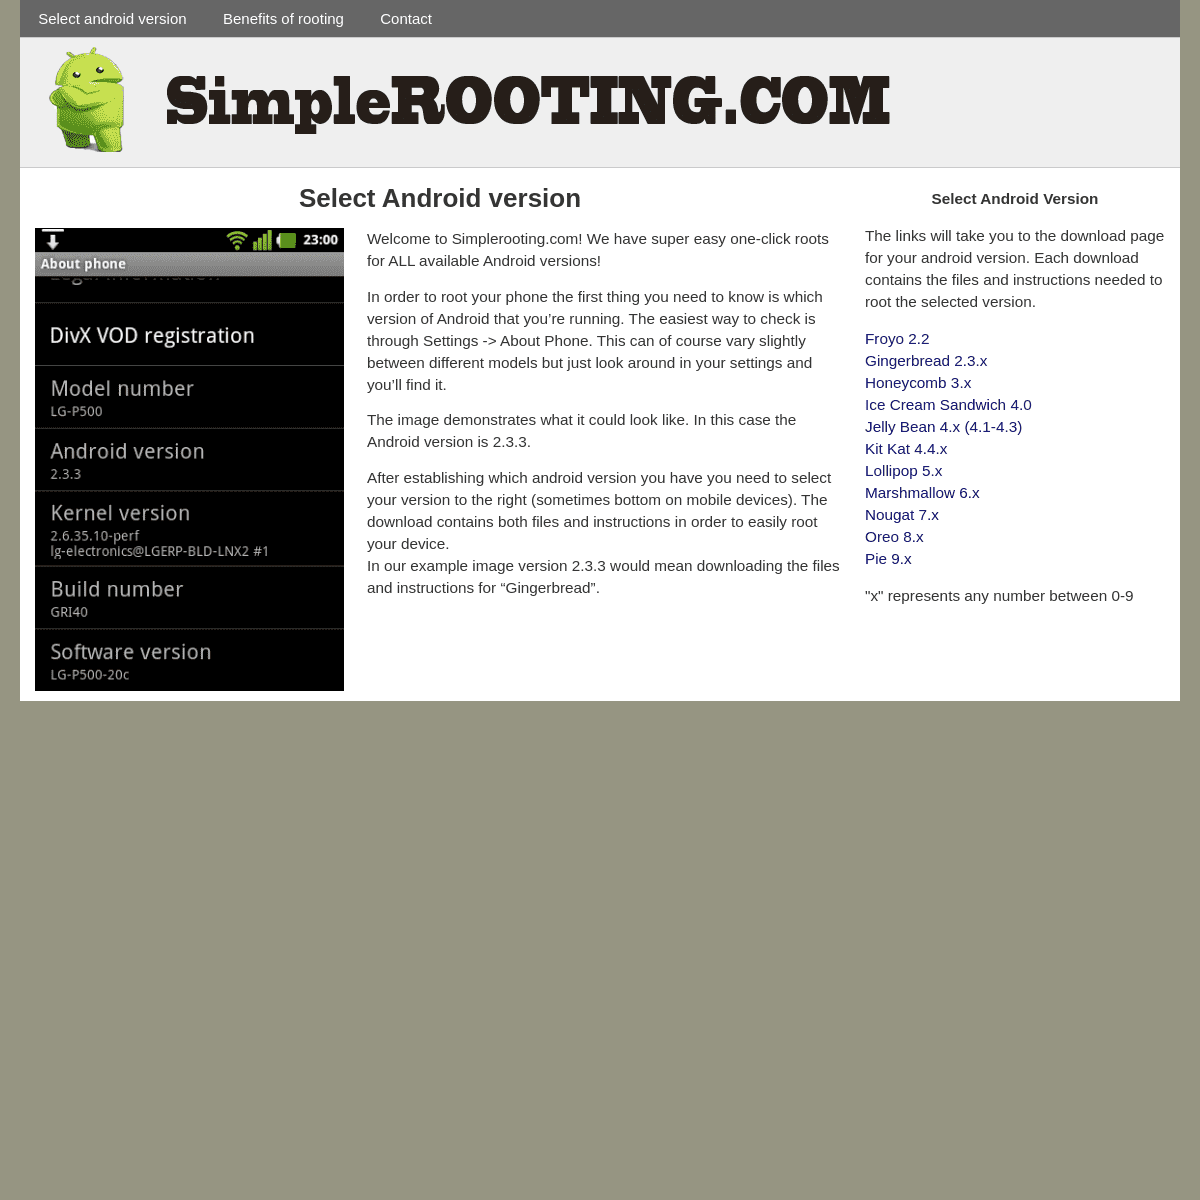 A complete backup of simplerooting.com